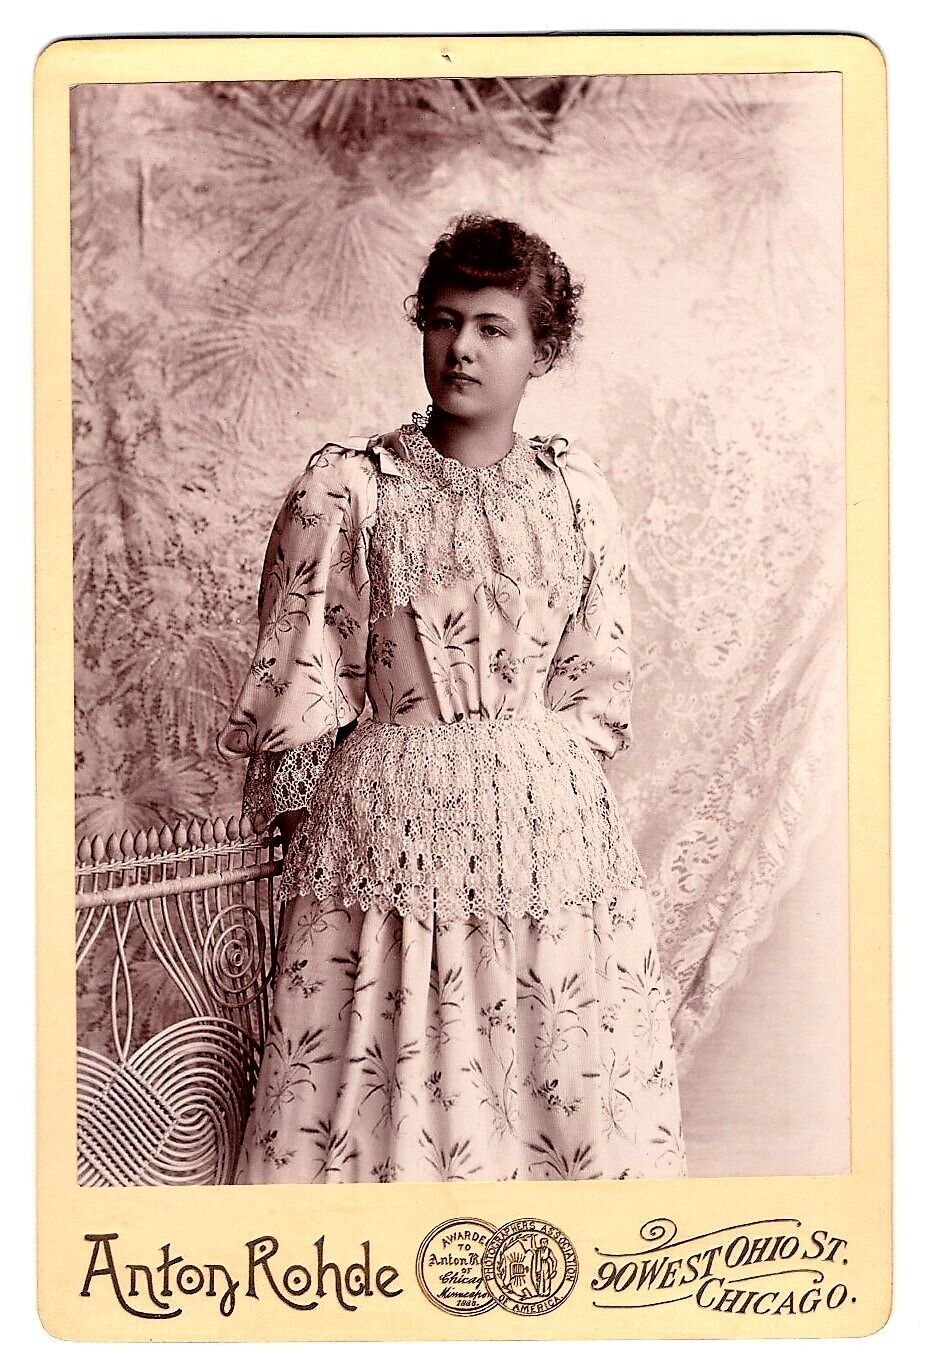 FIFTEEN YEAR OLD DAGMAR WEARING PRETTY DRESS IN CHICAGO, ILLINOIS : CABINET CARD